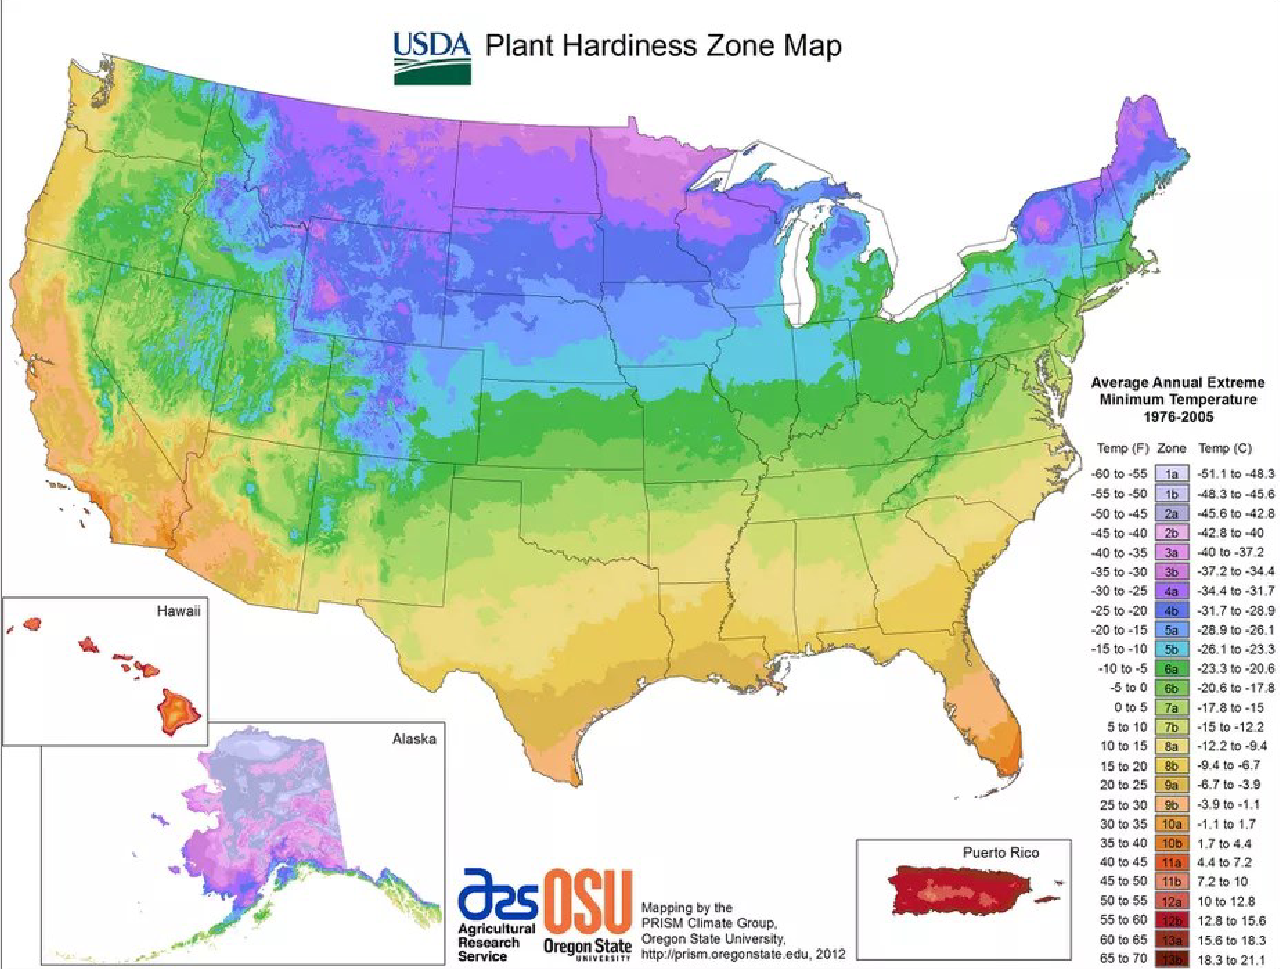 <p>plant hardiness zones are based on average minimum temperature. There are 13 zones that are divided evenly into 10 degree increments </p>